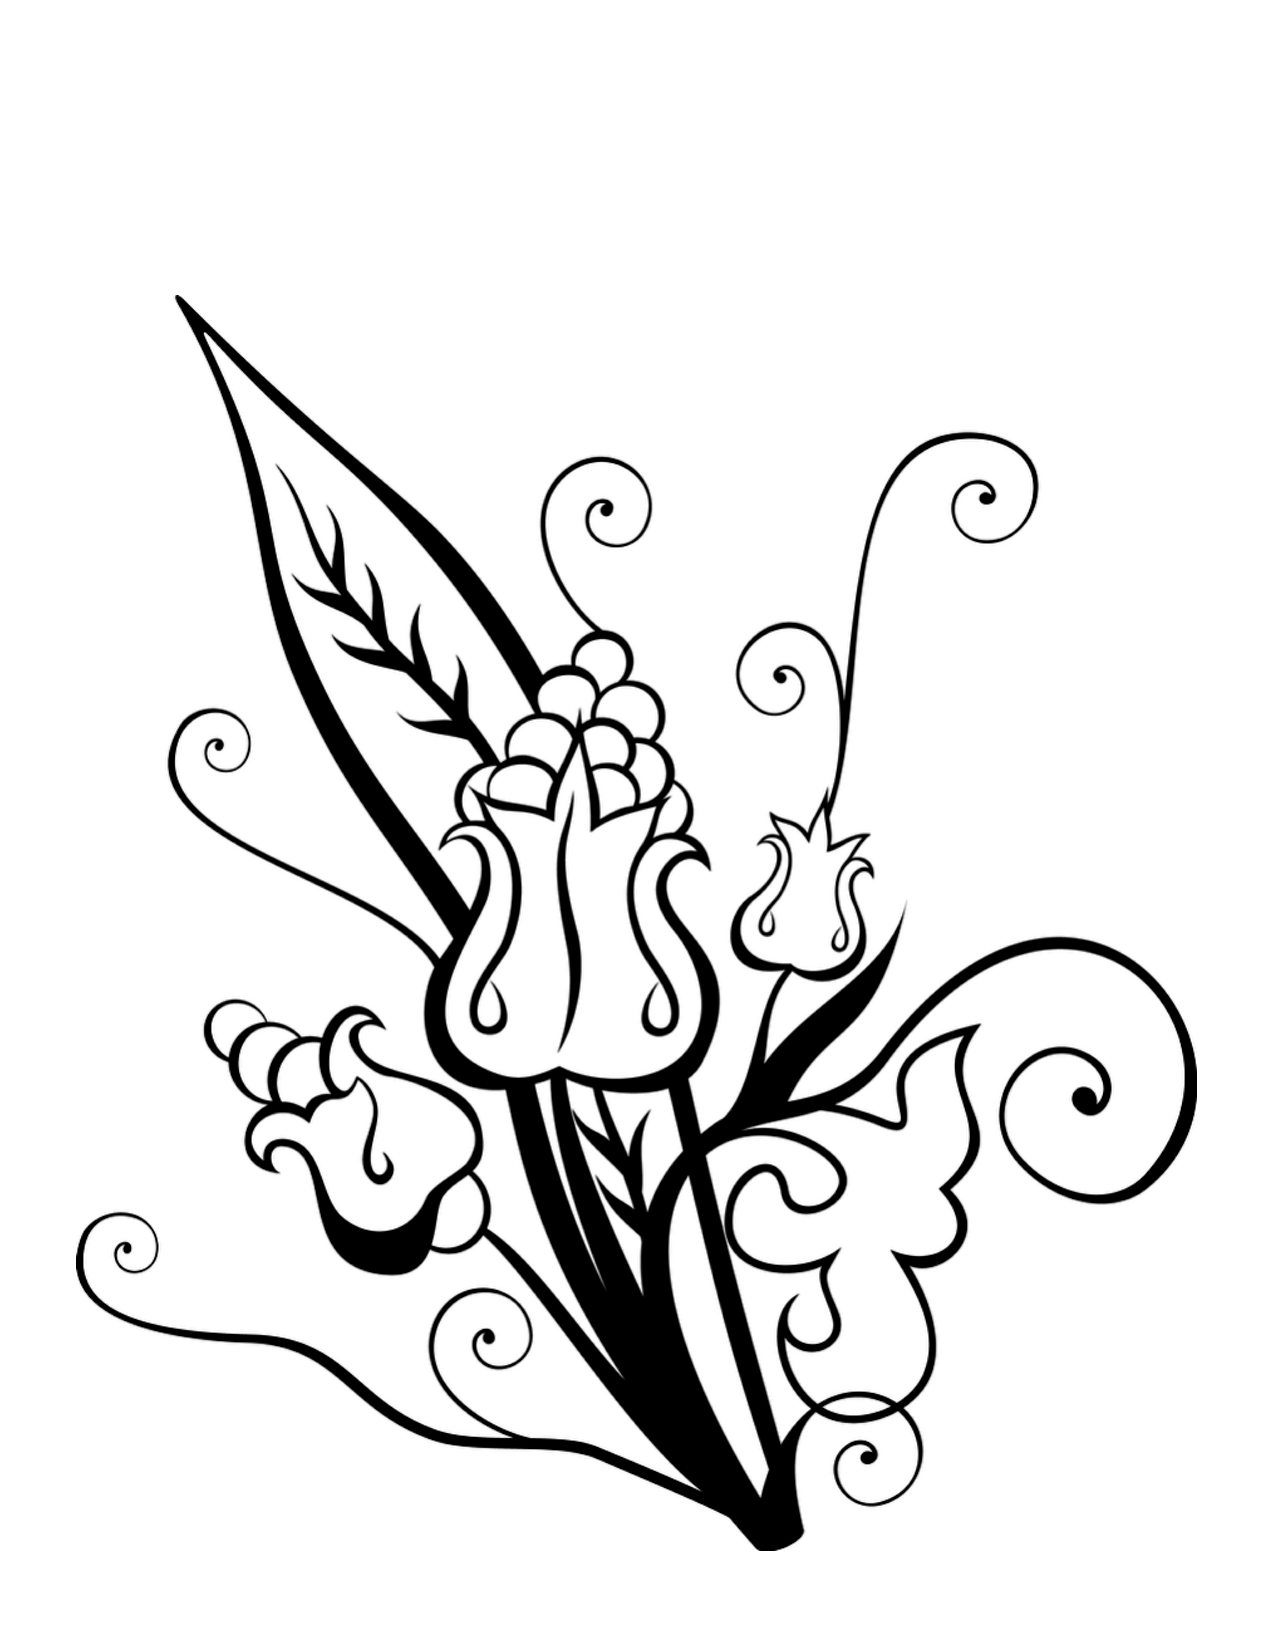 Swirly Flower Bouquet Coloring Page | Coloring-